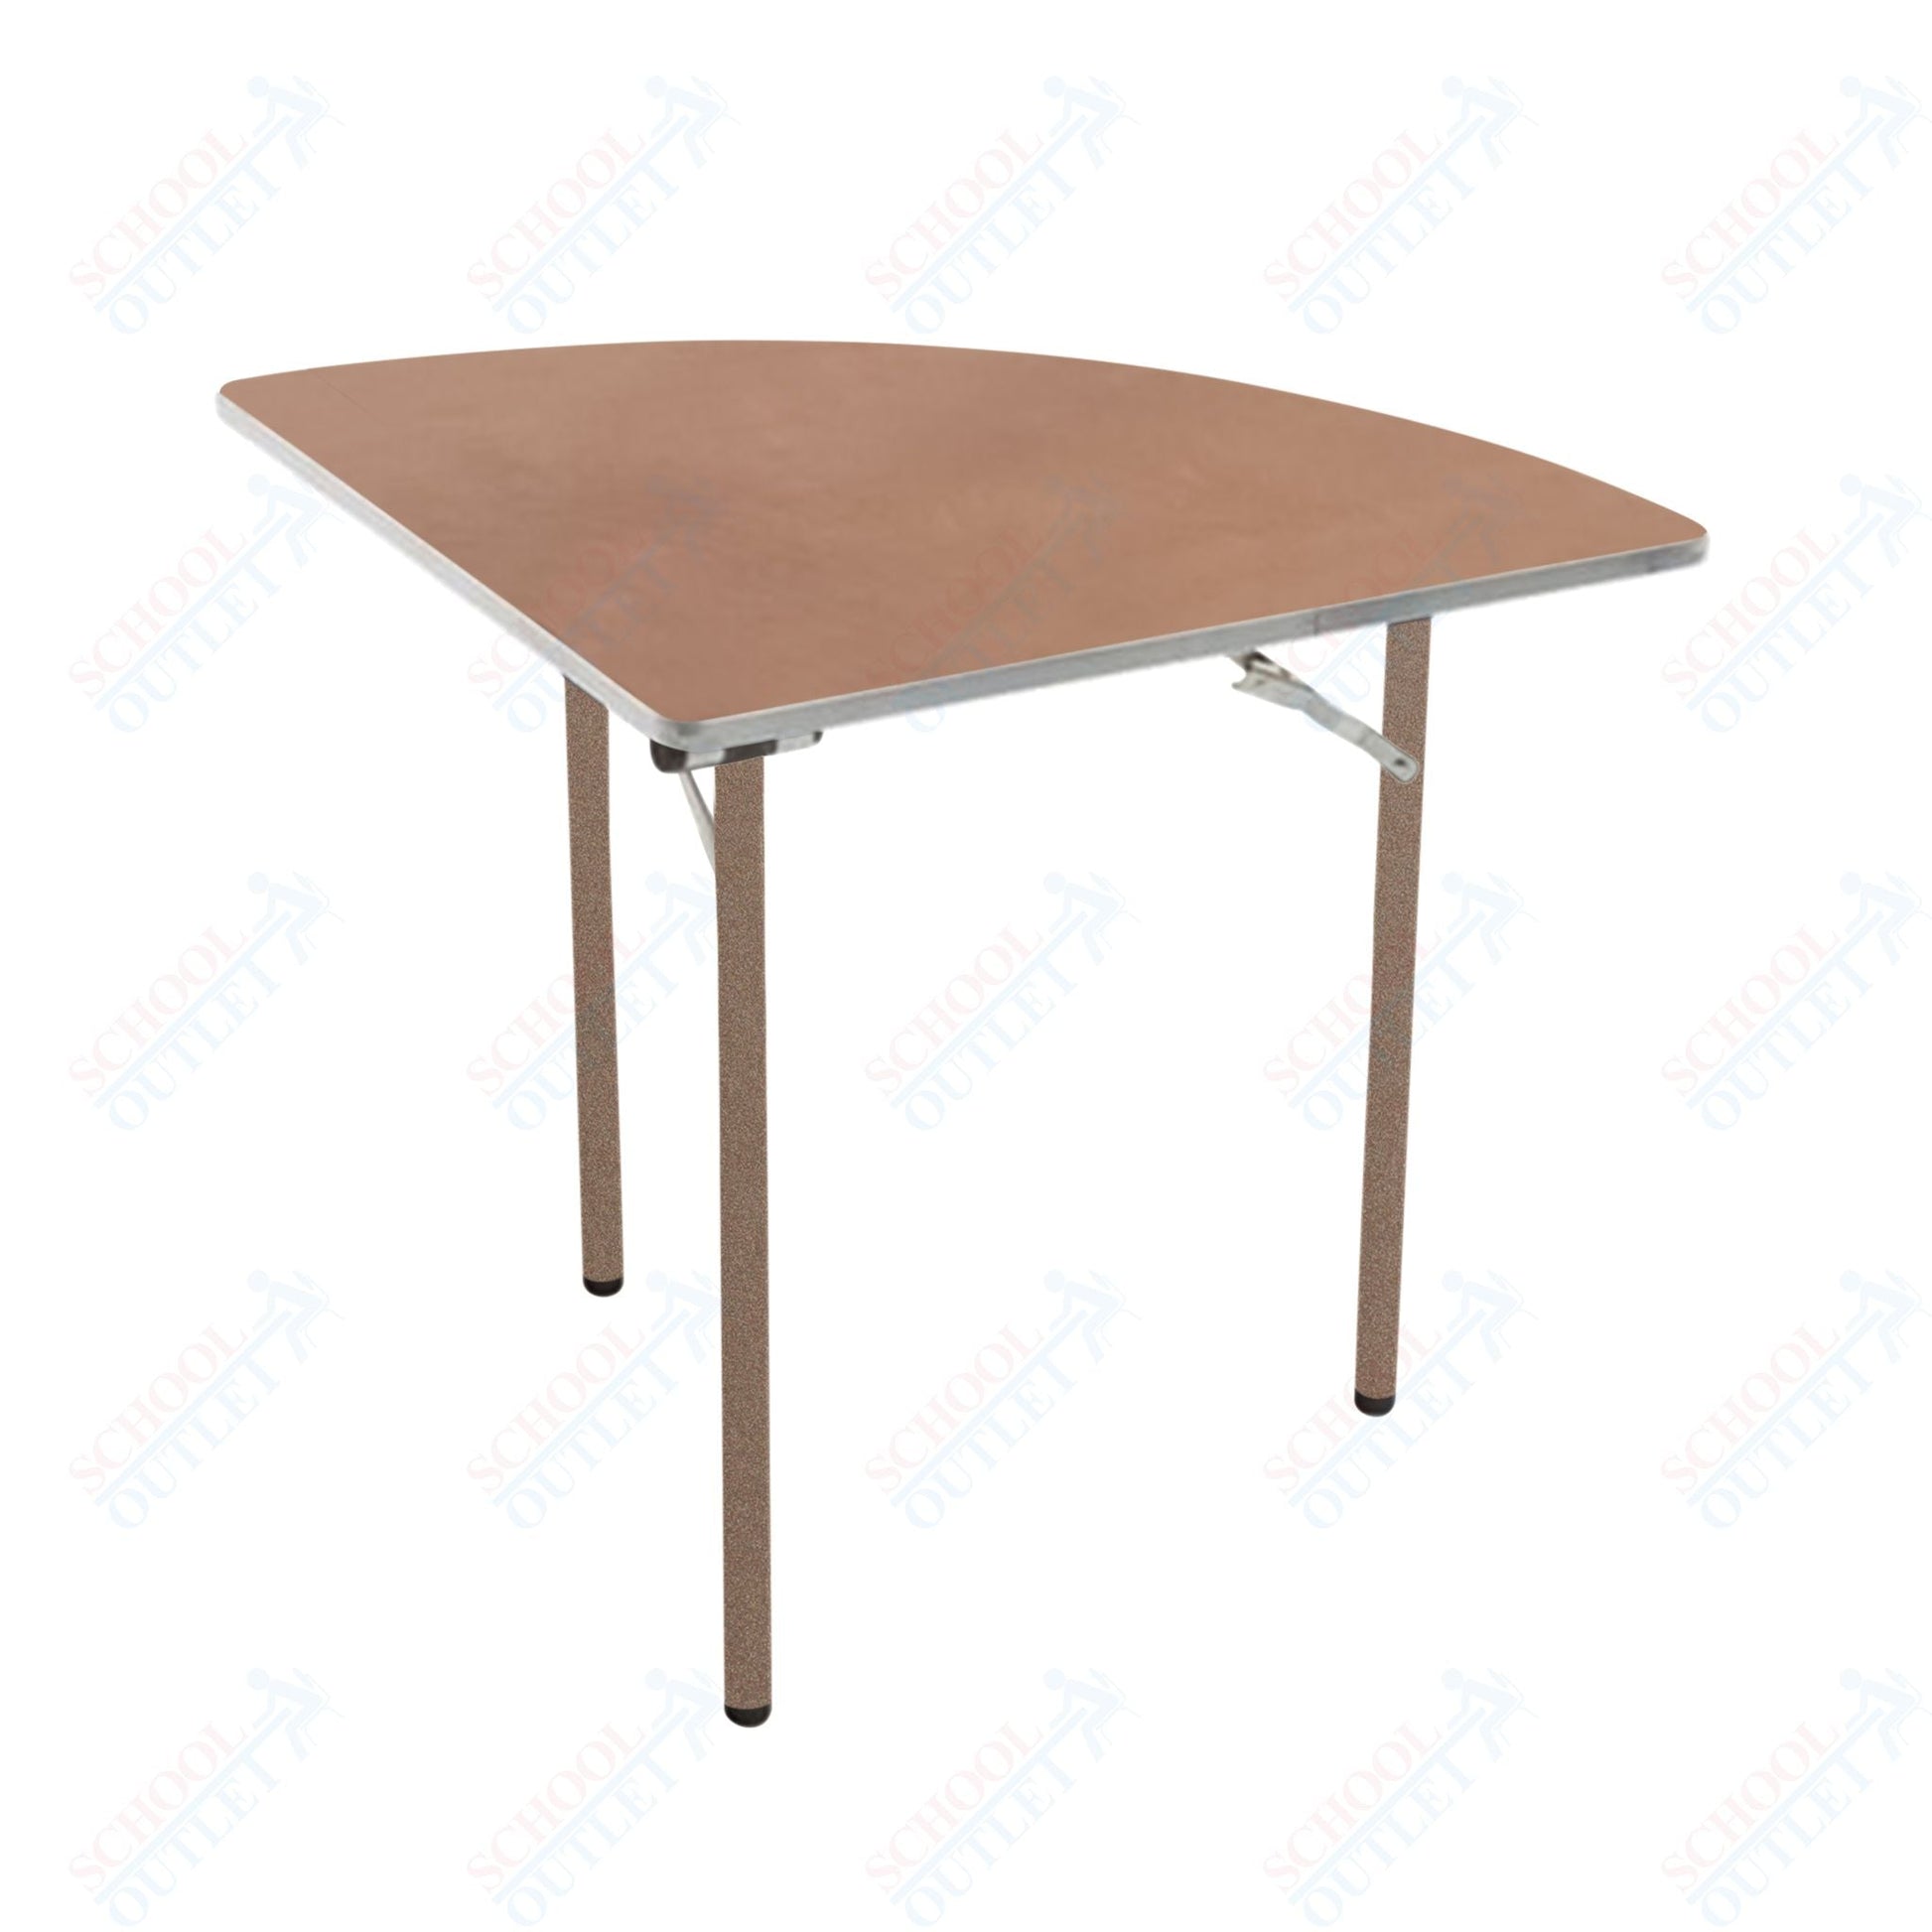 AmTab Folding Table - Plywood Stained and Sealed - Aluminum Edge - Quarter Round - Quarter 48" Diameter x 29"H (AmTab AMT - QR48PA) - SchoolOutlet